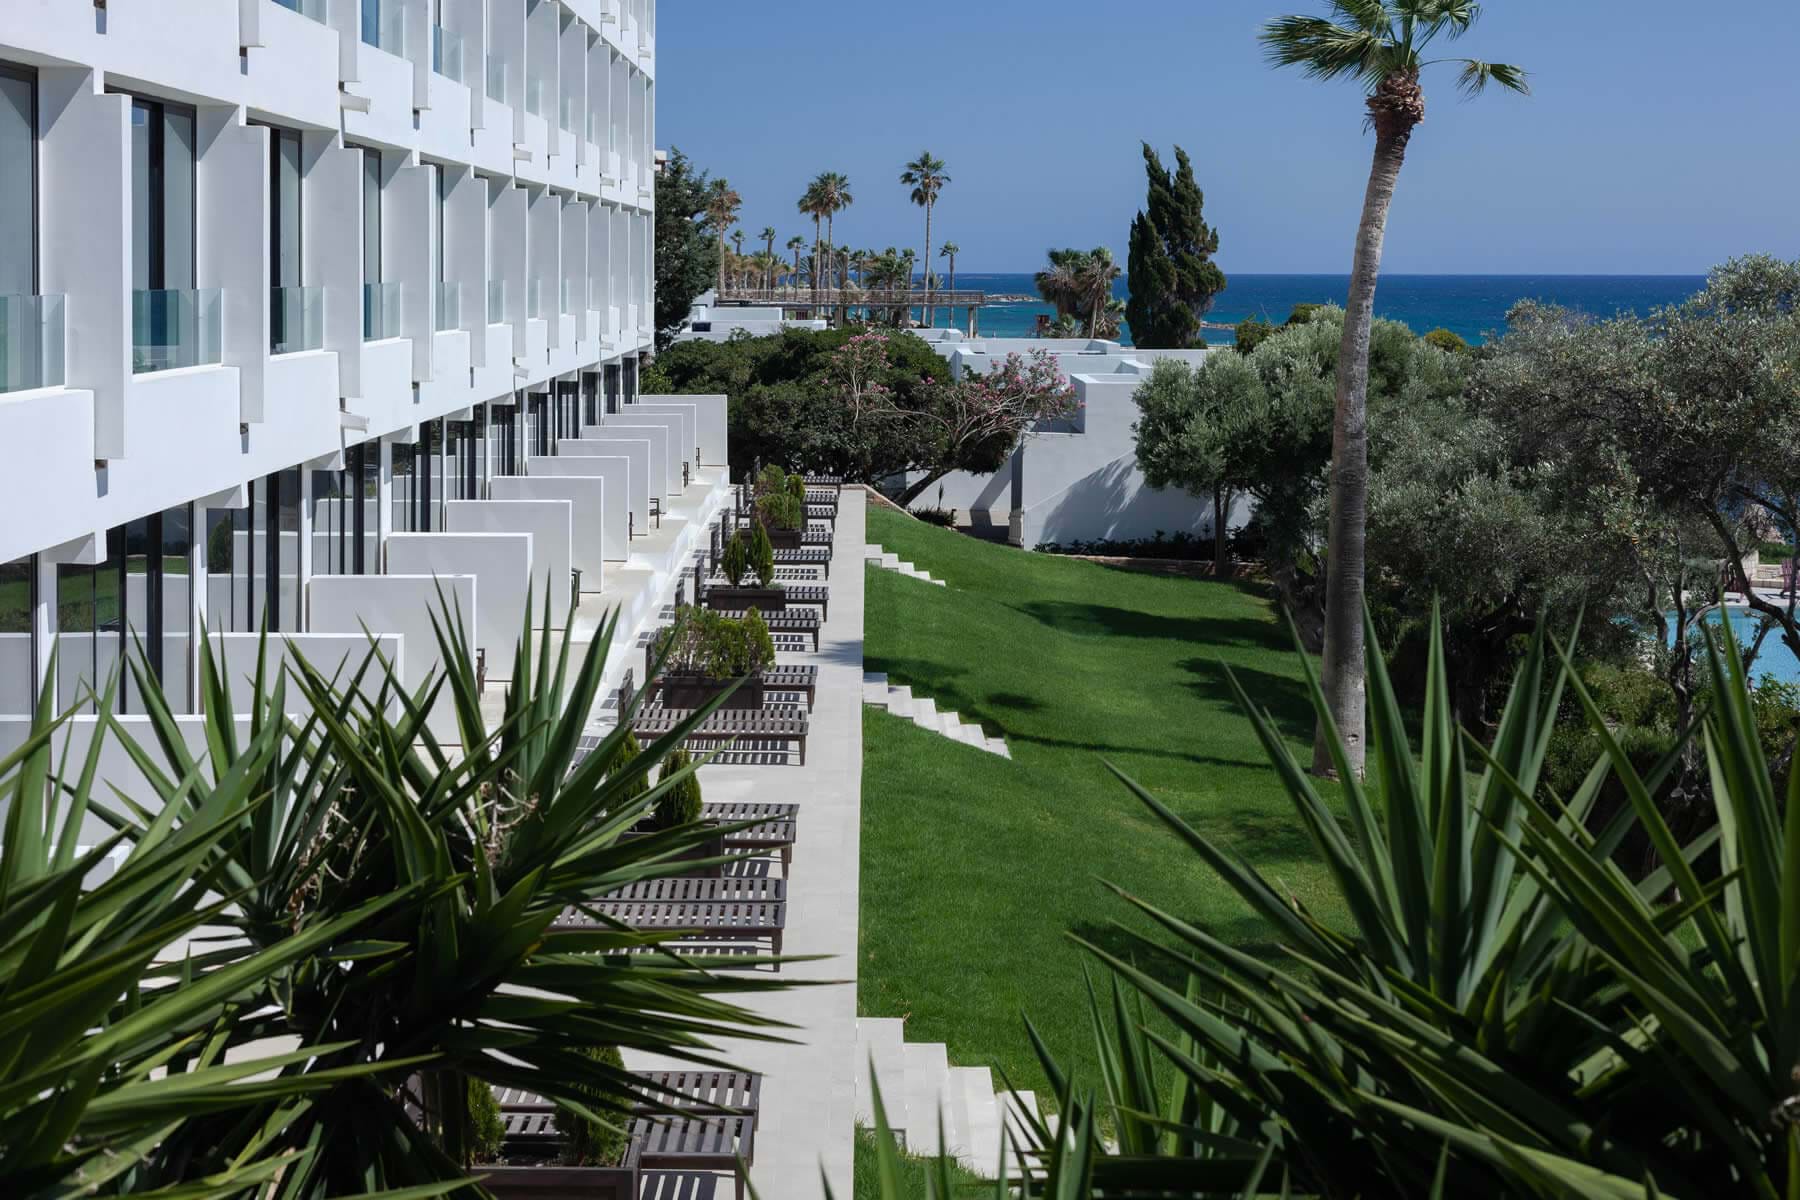 Almyra Hotel - Terrace Rooms and Gardens